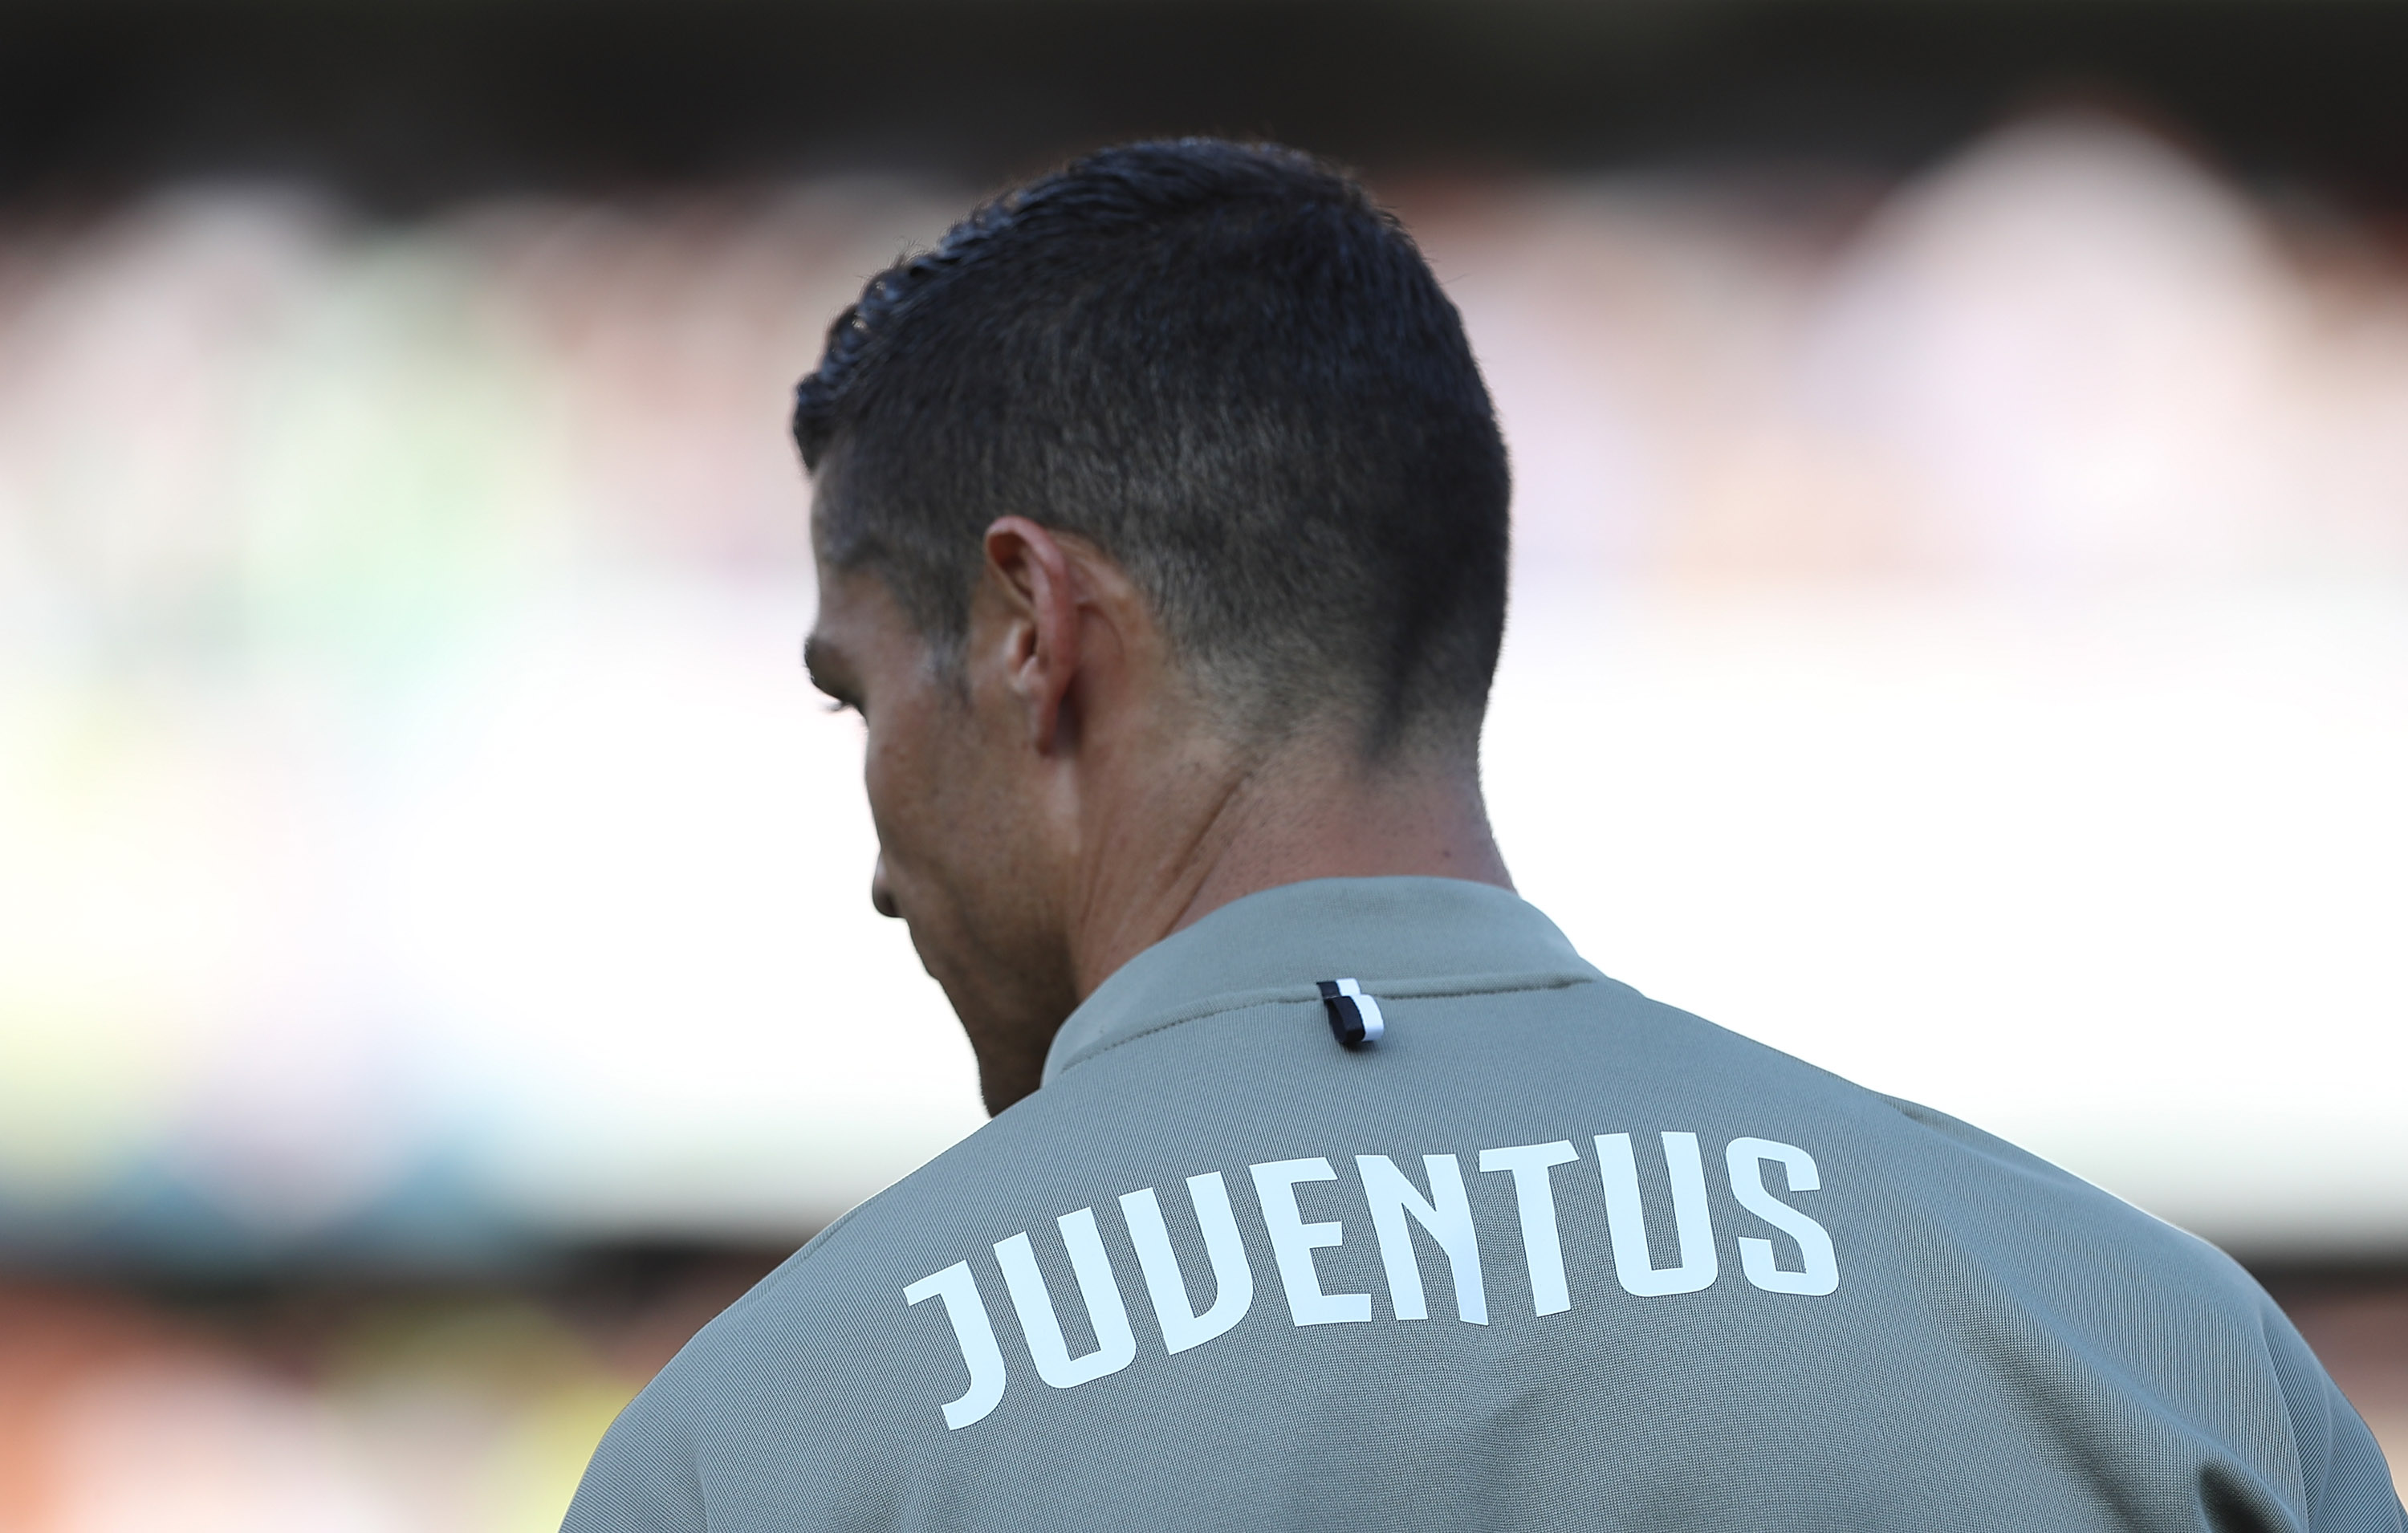 VERONA, ITALY - AUGUST 18:  Cristiano Ronaldo of Juventus FC looks on before the Serie A match between Chievo Verona and Juventus at Stadio Marc'Antonio Bentegodi on August 18, 2018 in Verona, Italy.  (Photo by Marco Luzzani/Getty Images)